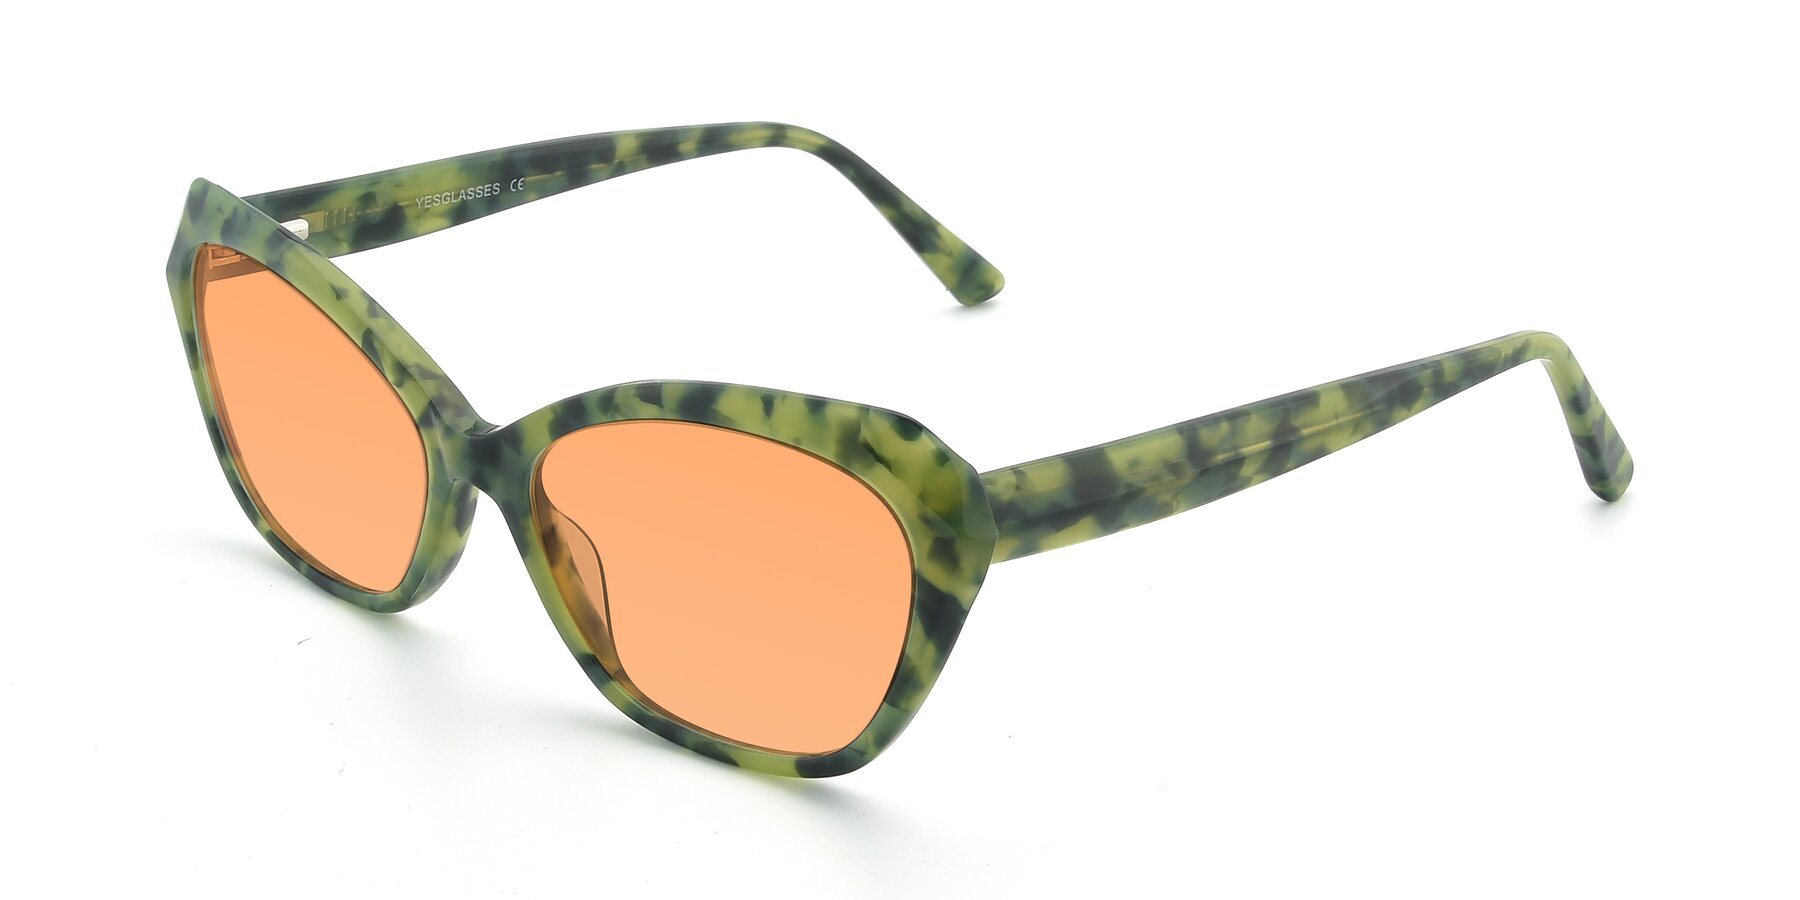 Angle of 17351 in Floral Green with Medium Orange Tinted Lenses